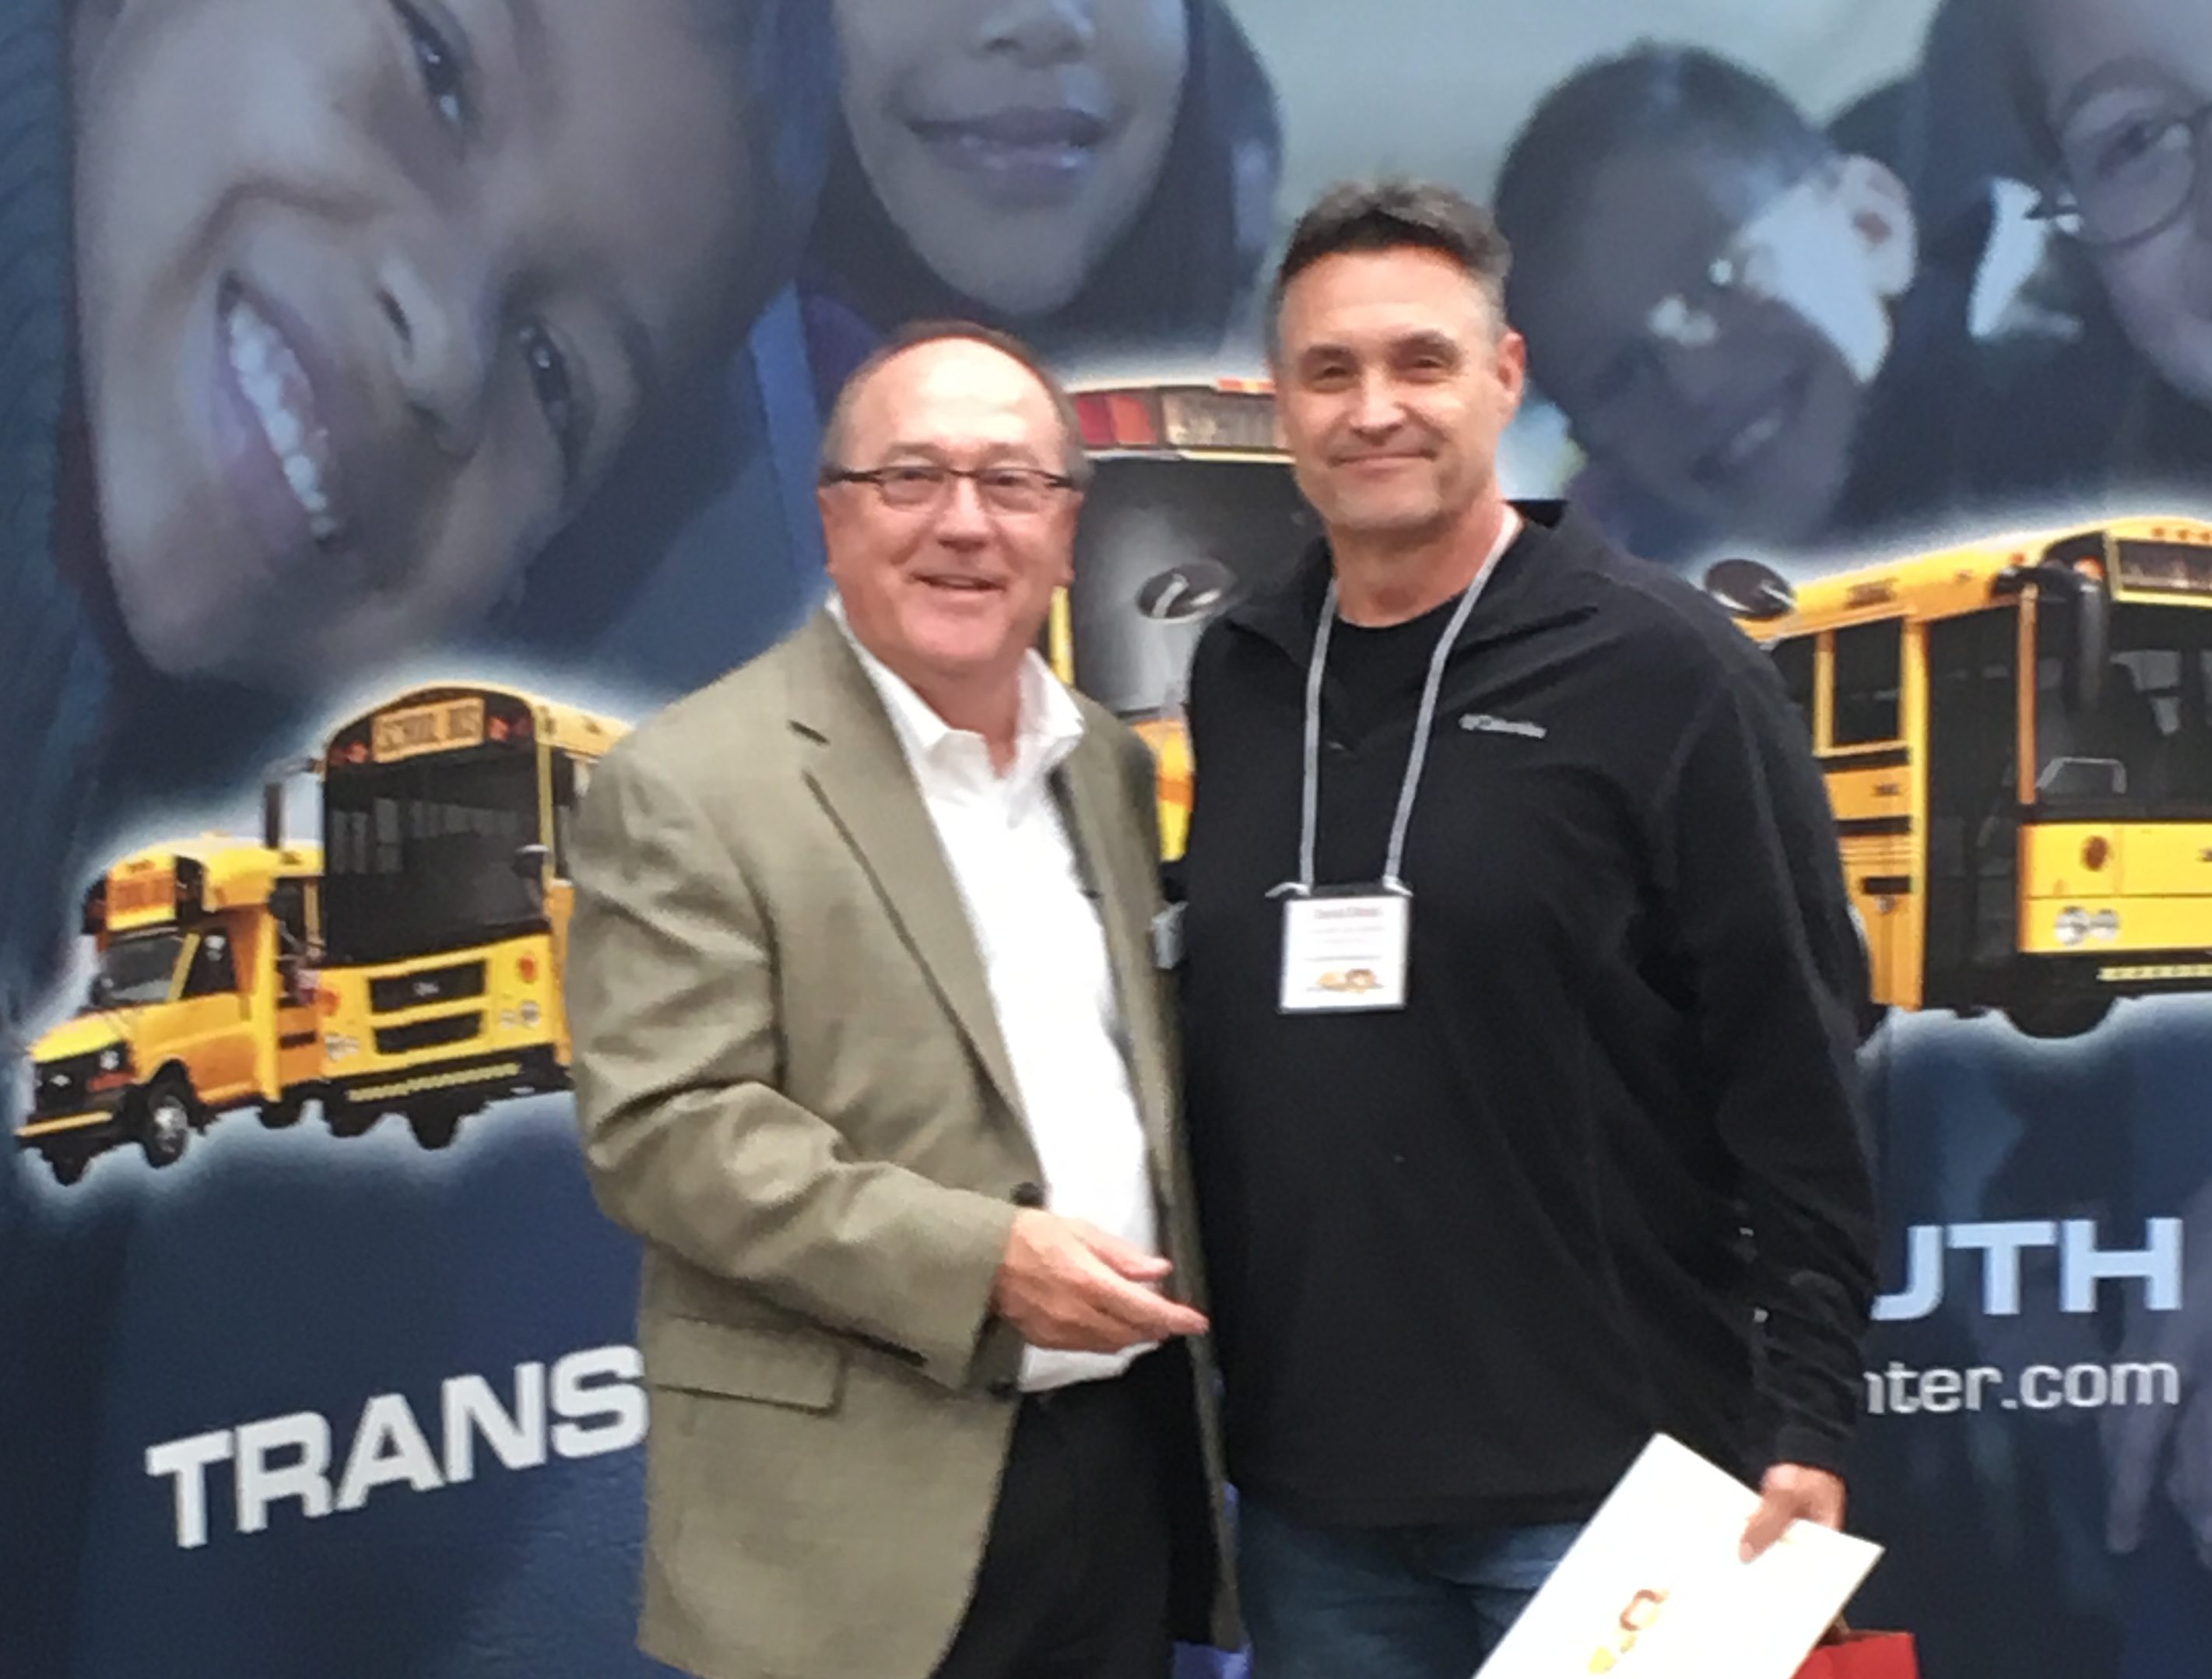 Trussville school bus driver wins Driver of the Year at Love the Bus awards